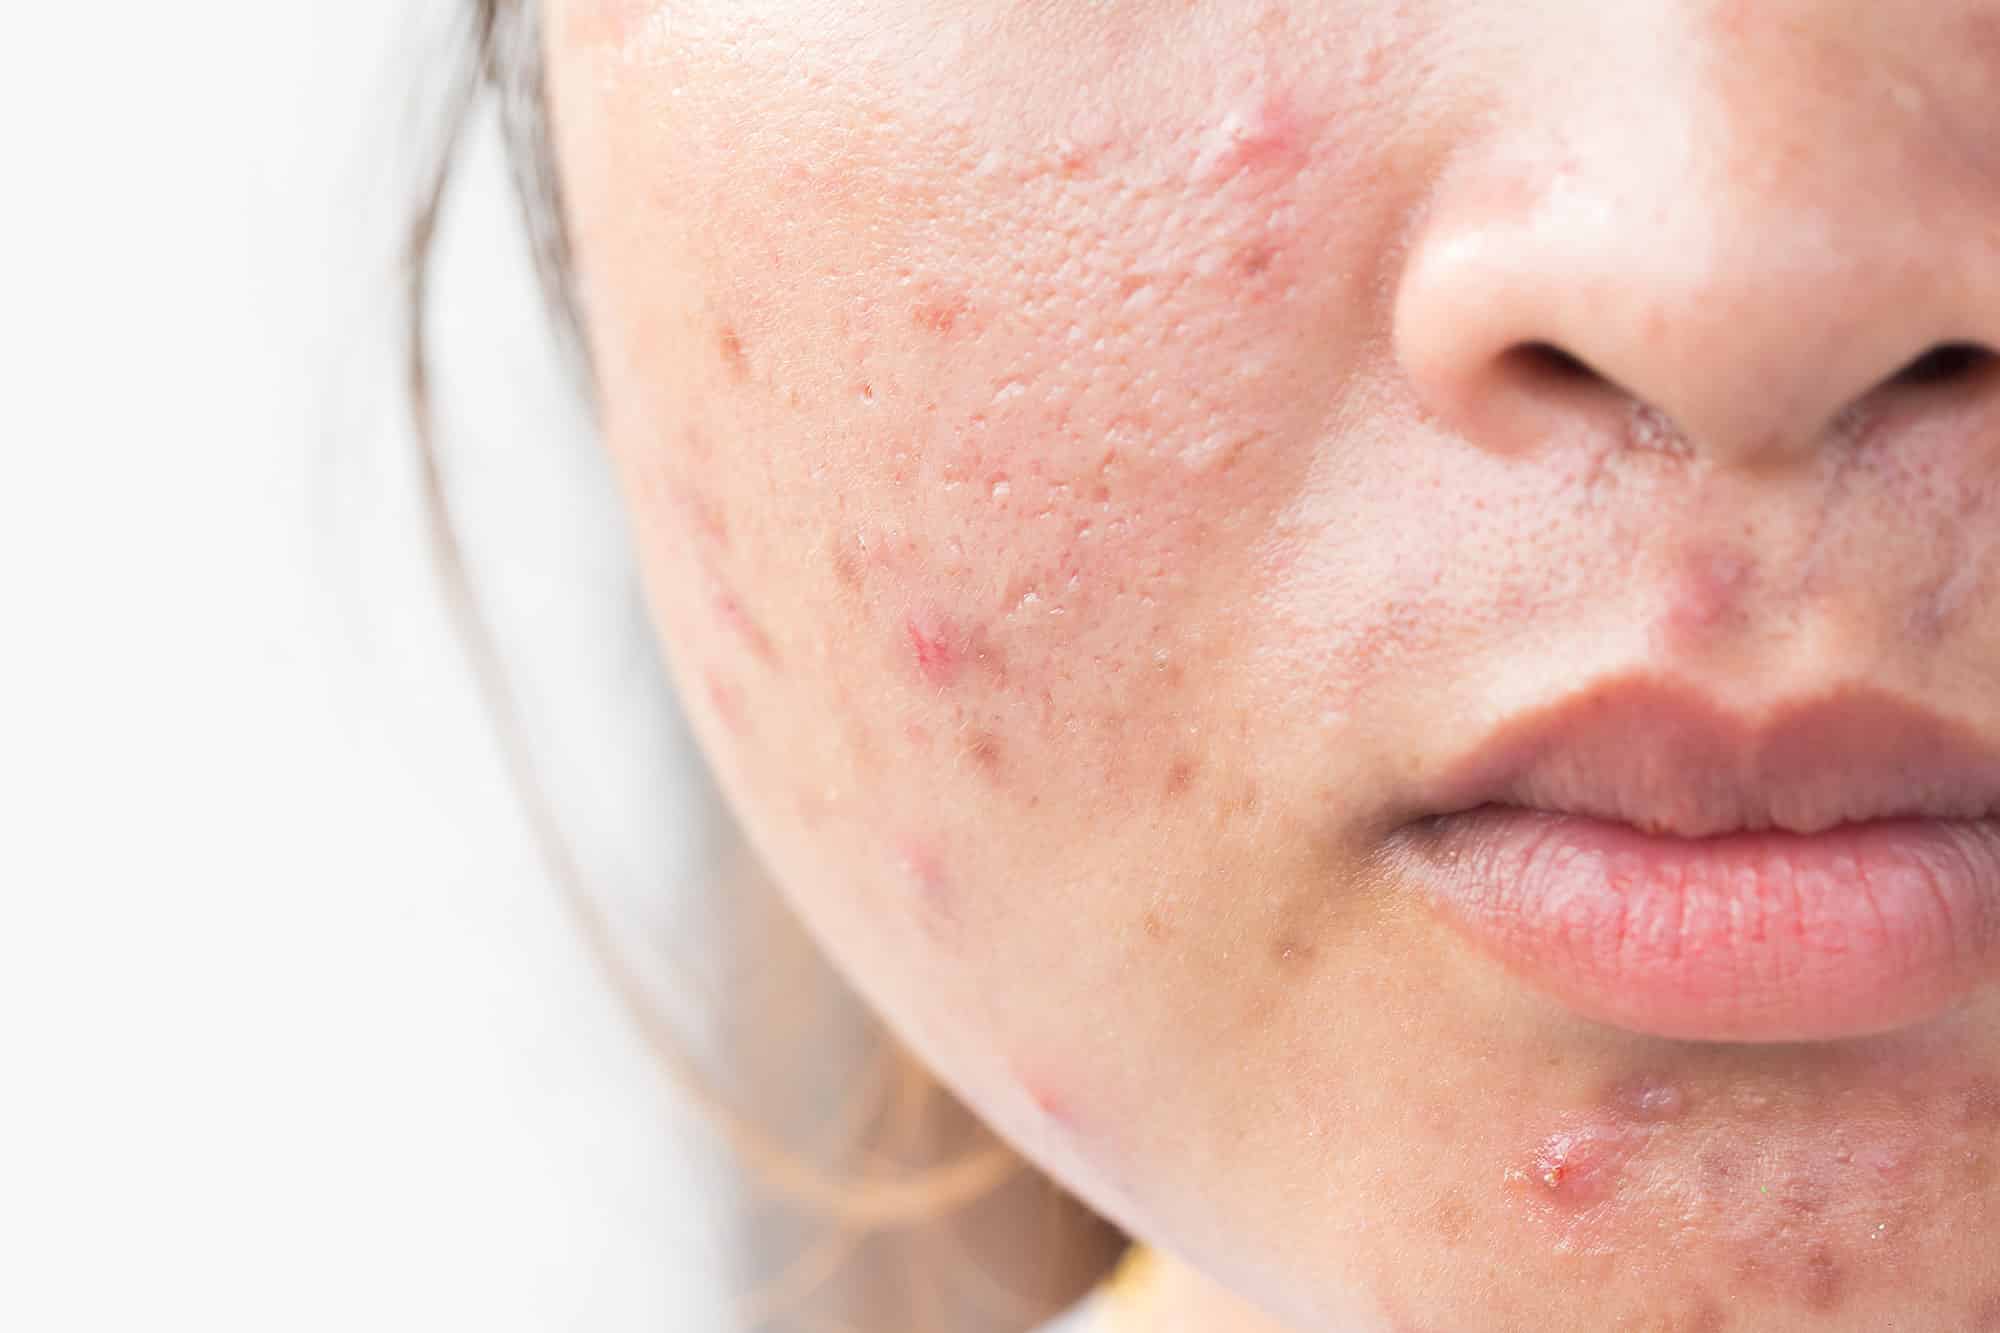 Rosacea is known for looking red and blotchy, which is why it can be mistaken as acne